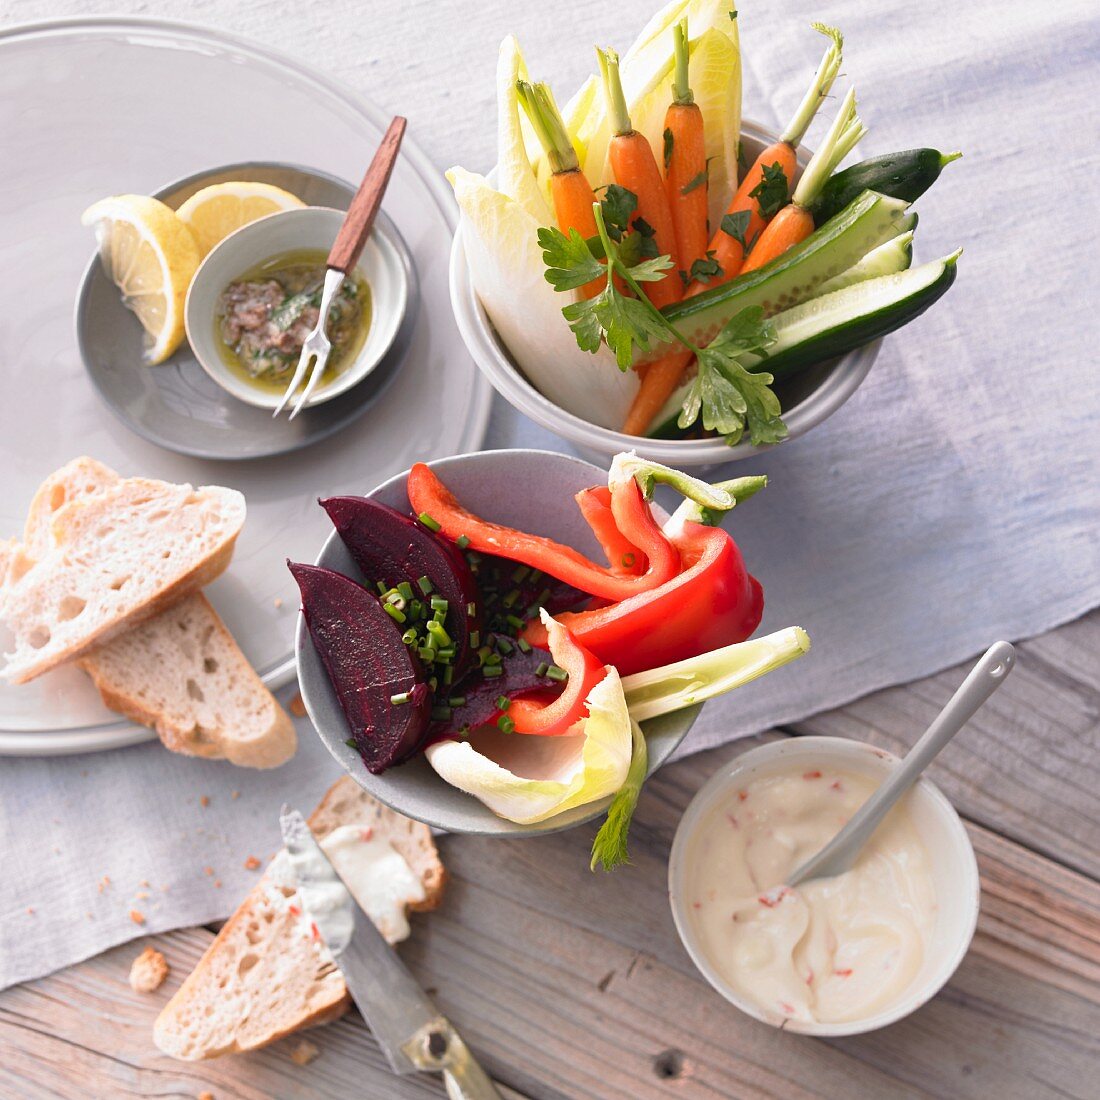 Vegetable sticks with spicy mayonnaise and an anchovy dip